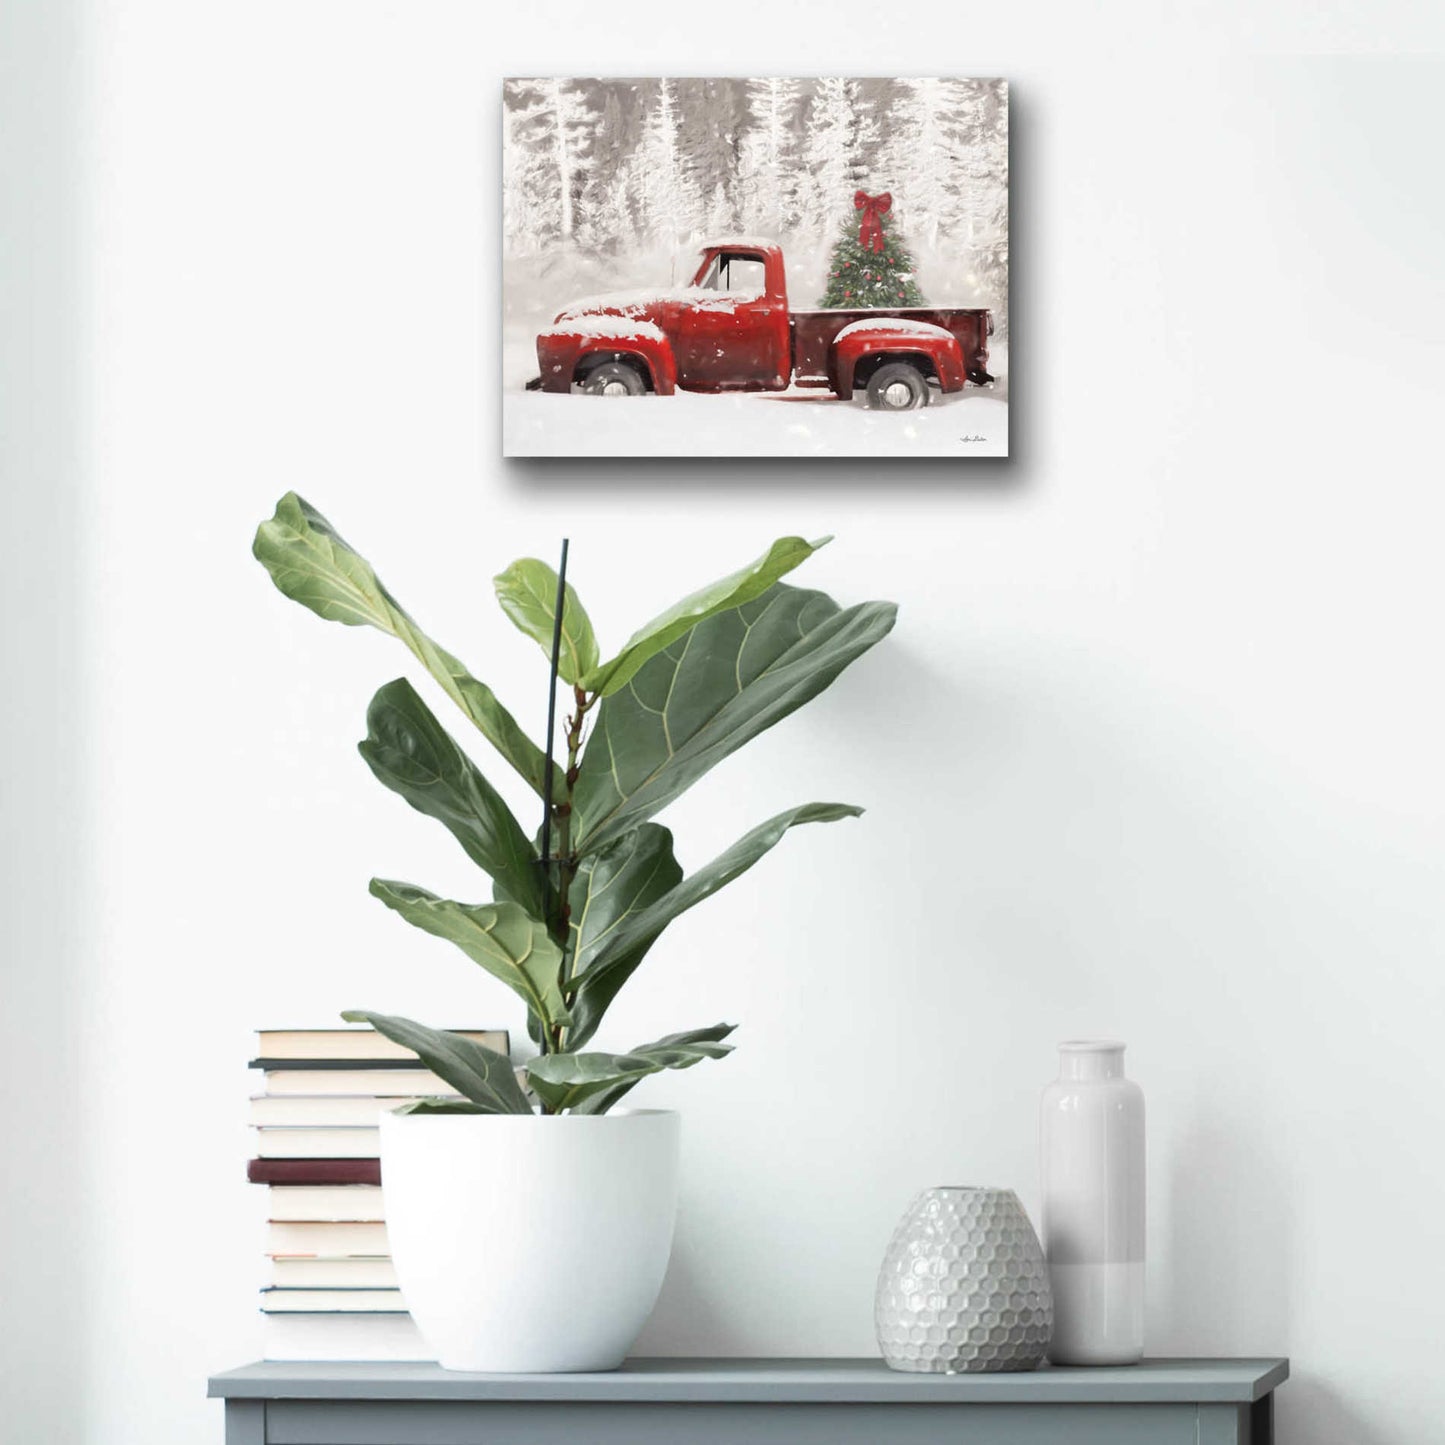 Epic Art 'Red Truck with Christmas Tree II' by Lori Deiter Acrylic Glass Wall Art,16x12